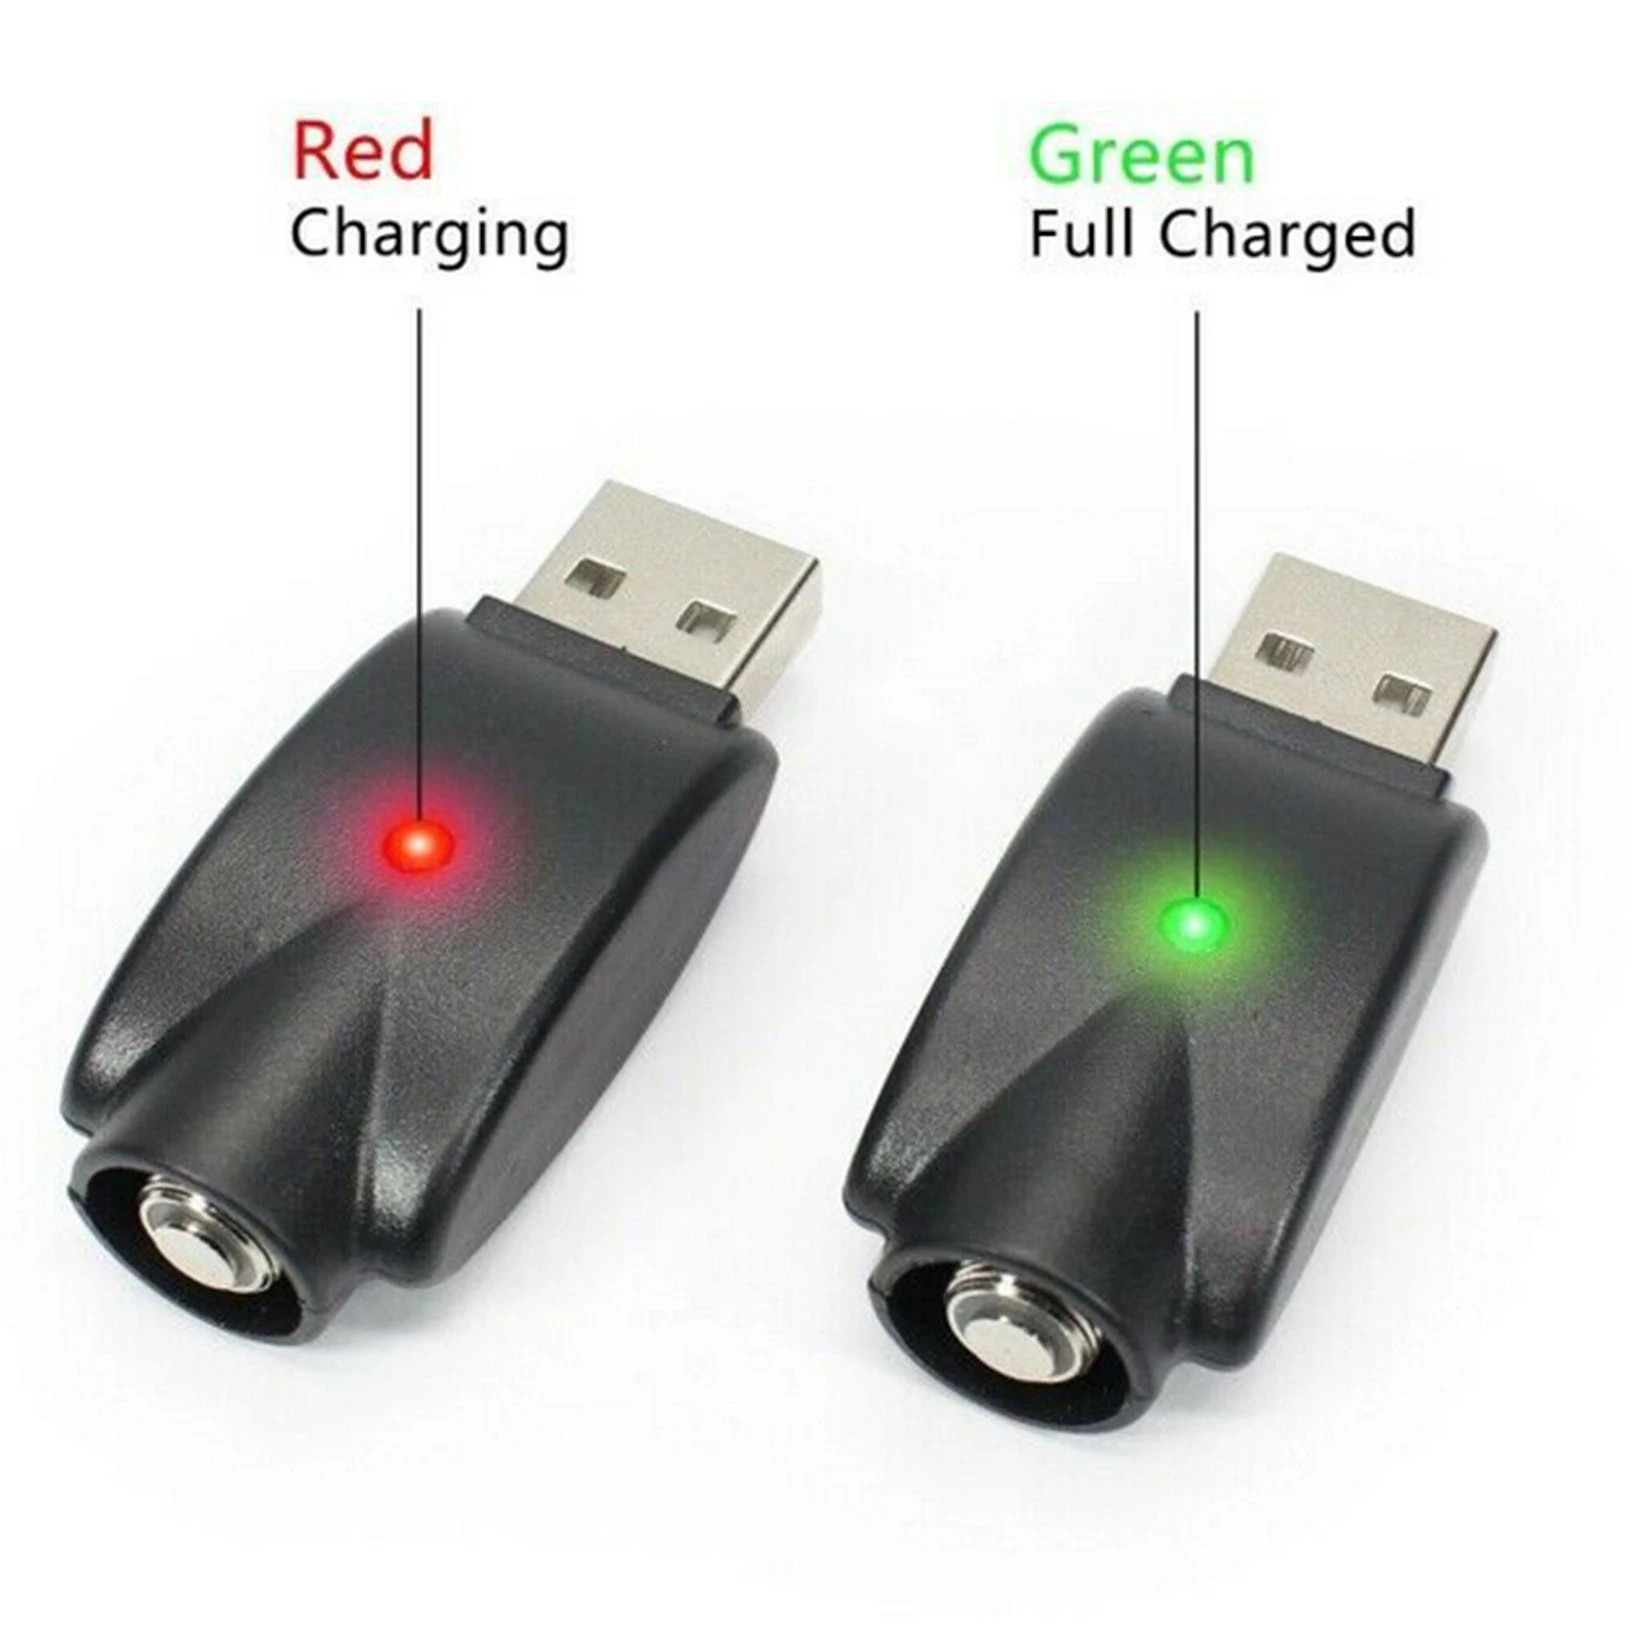 USB Smart Charger Cable Intelligent Overcharge Protection Compatible for USB Adapter Cable with LED Indicator 2pack 